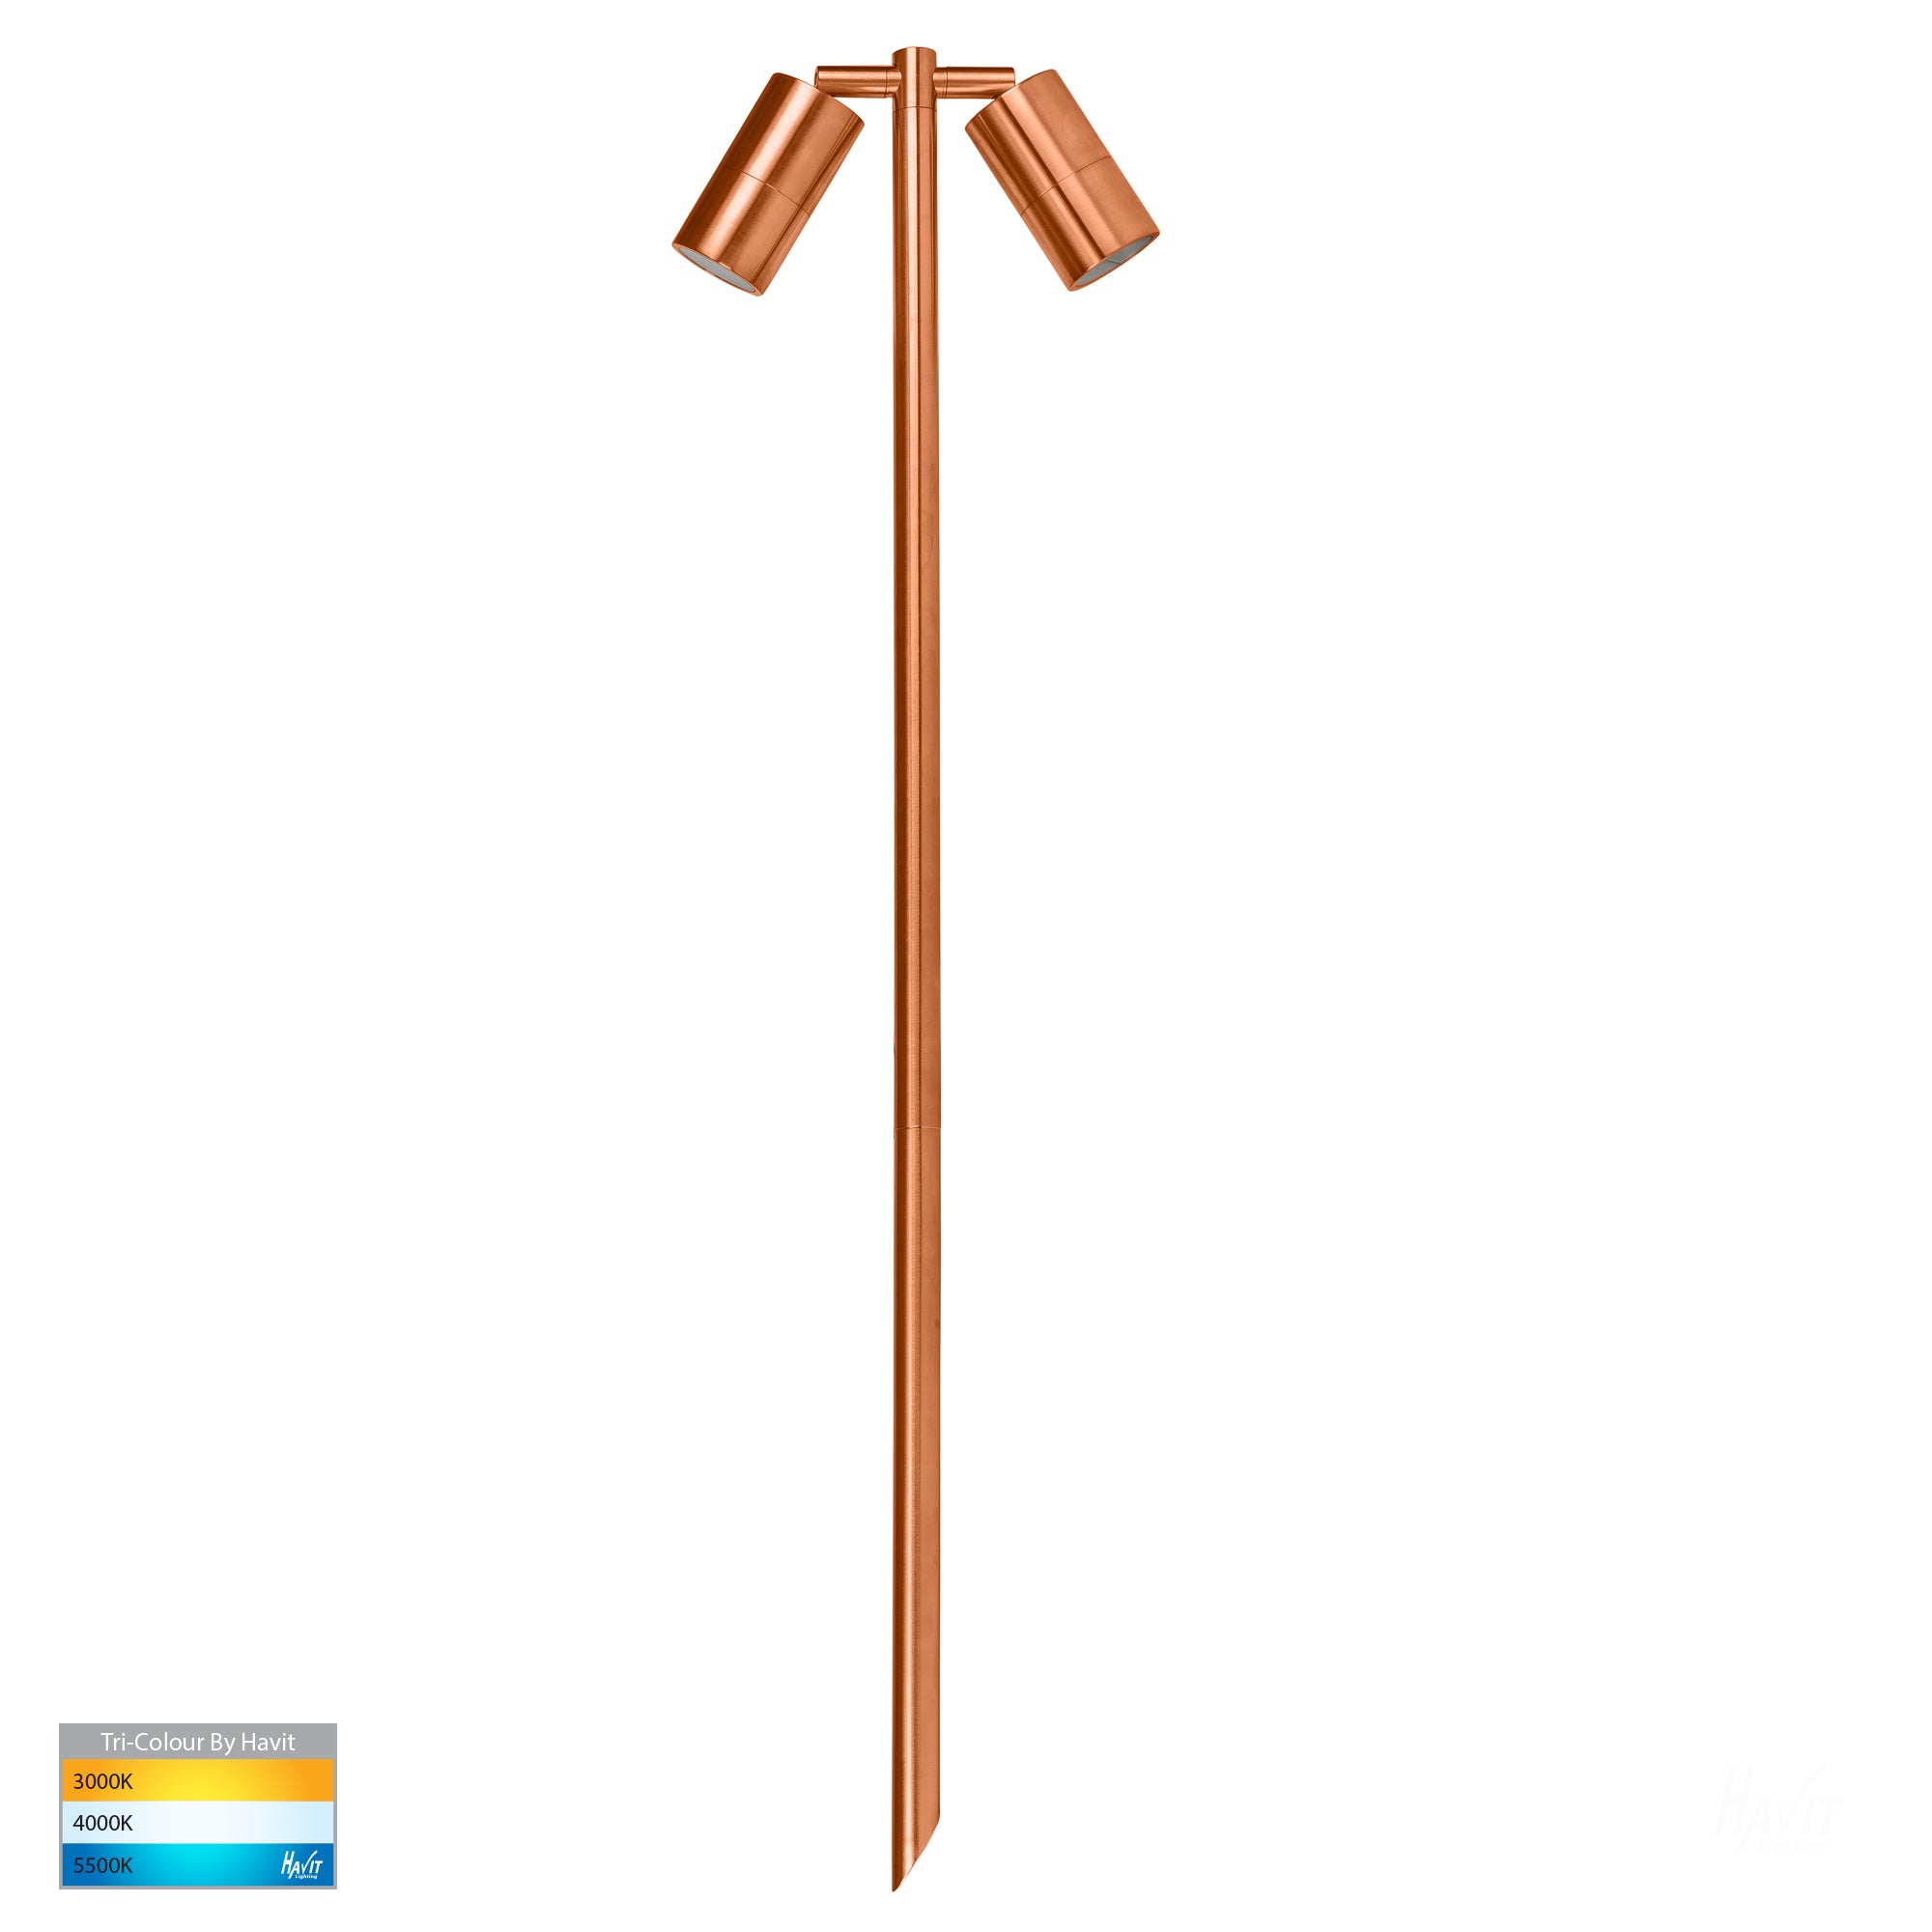 HV1405T-CP - Tivah Solid Copper TRI Colour Double Adjustable LED Bollard Spike Light